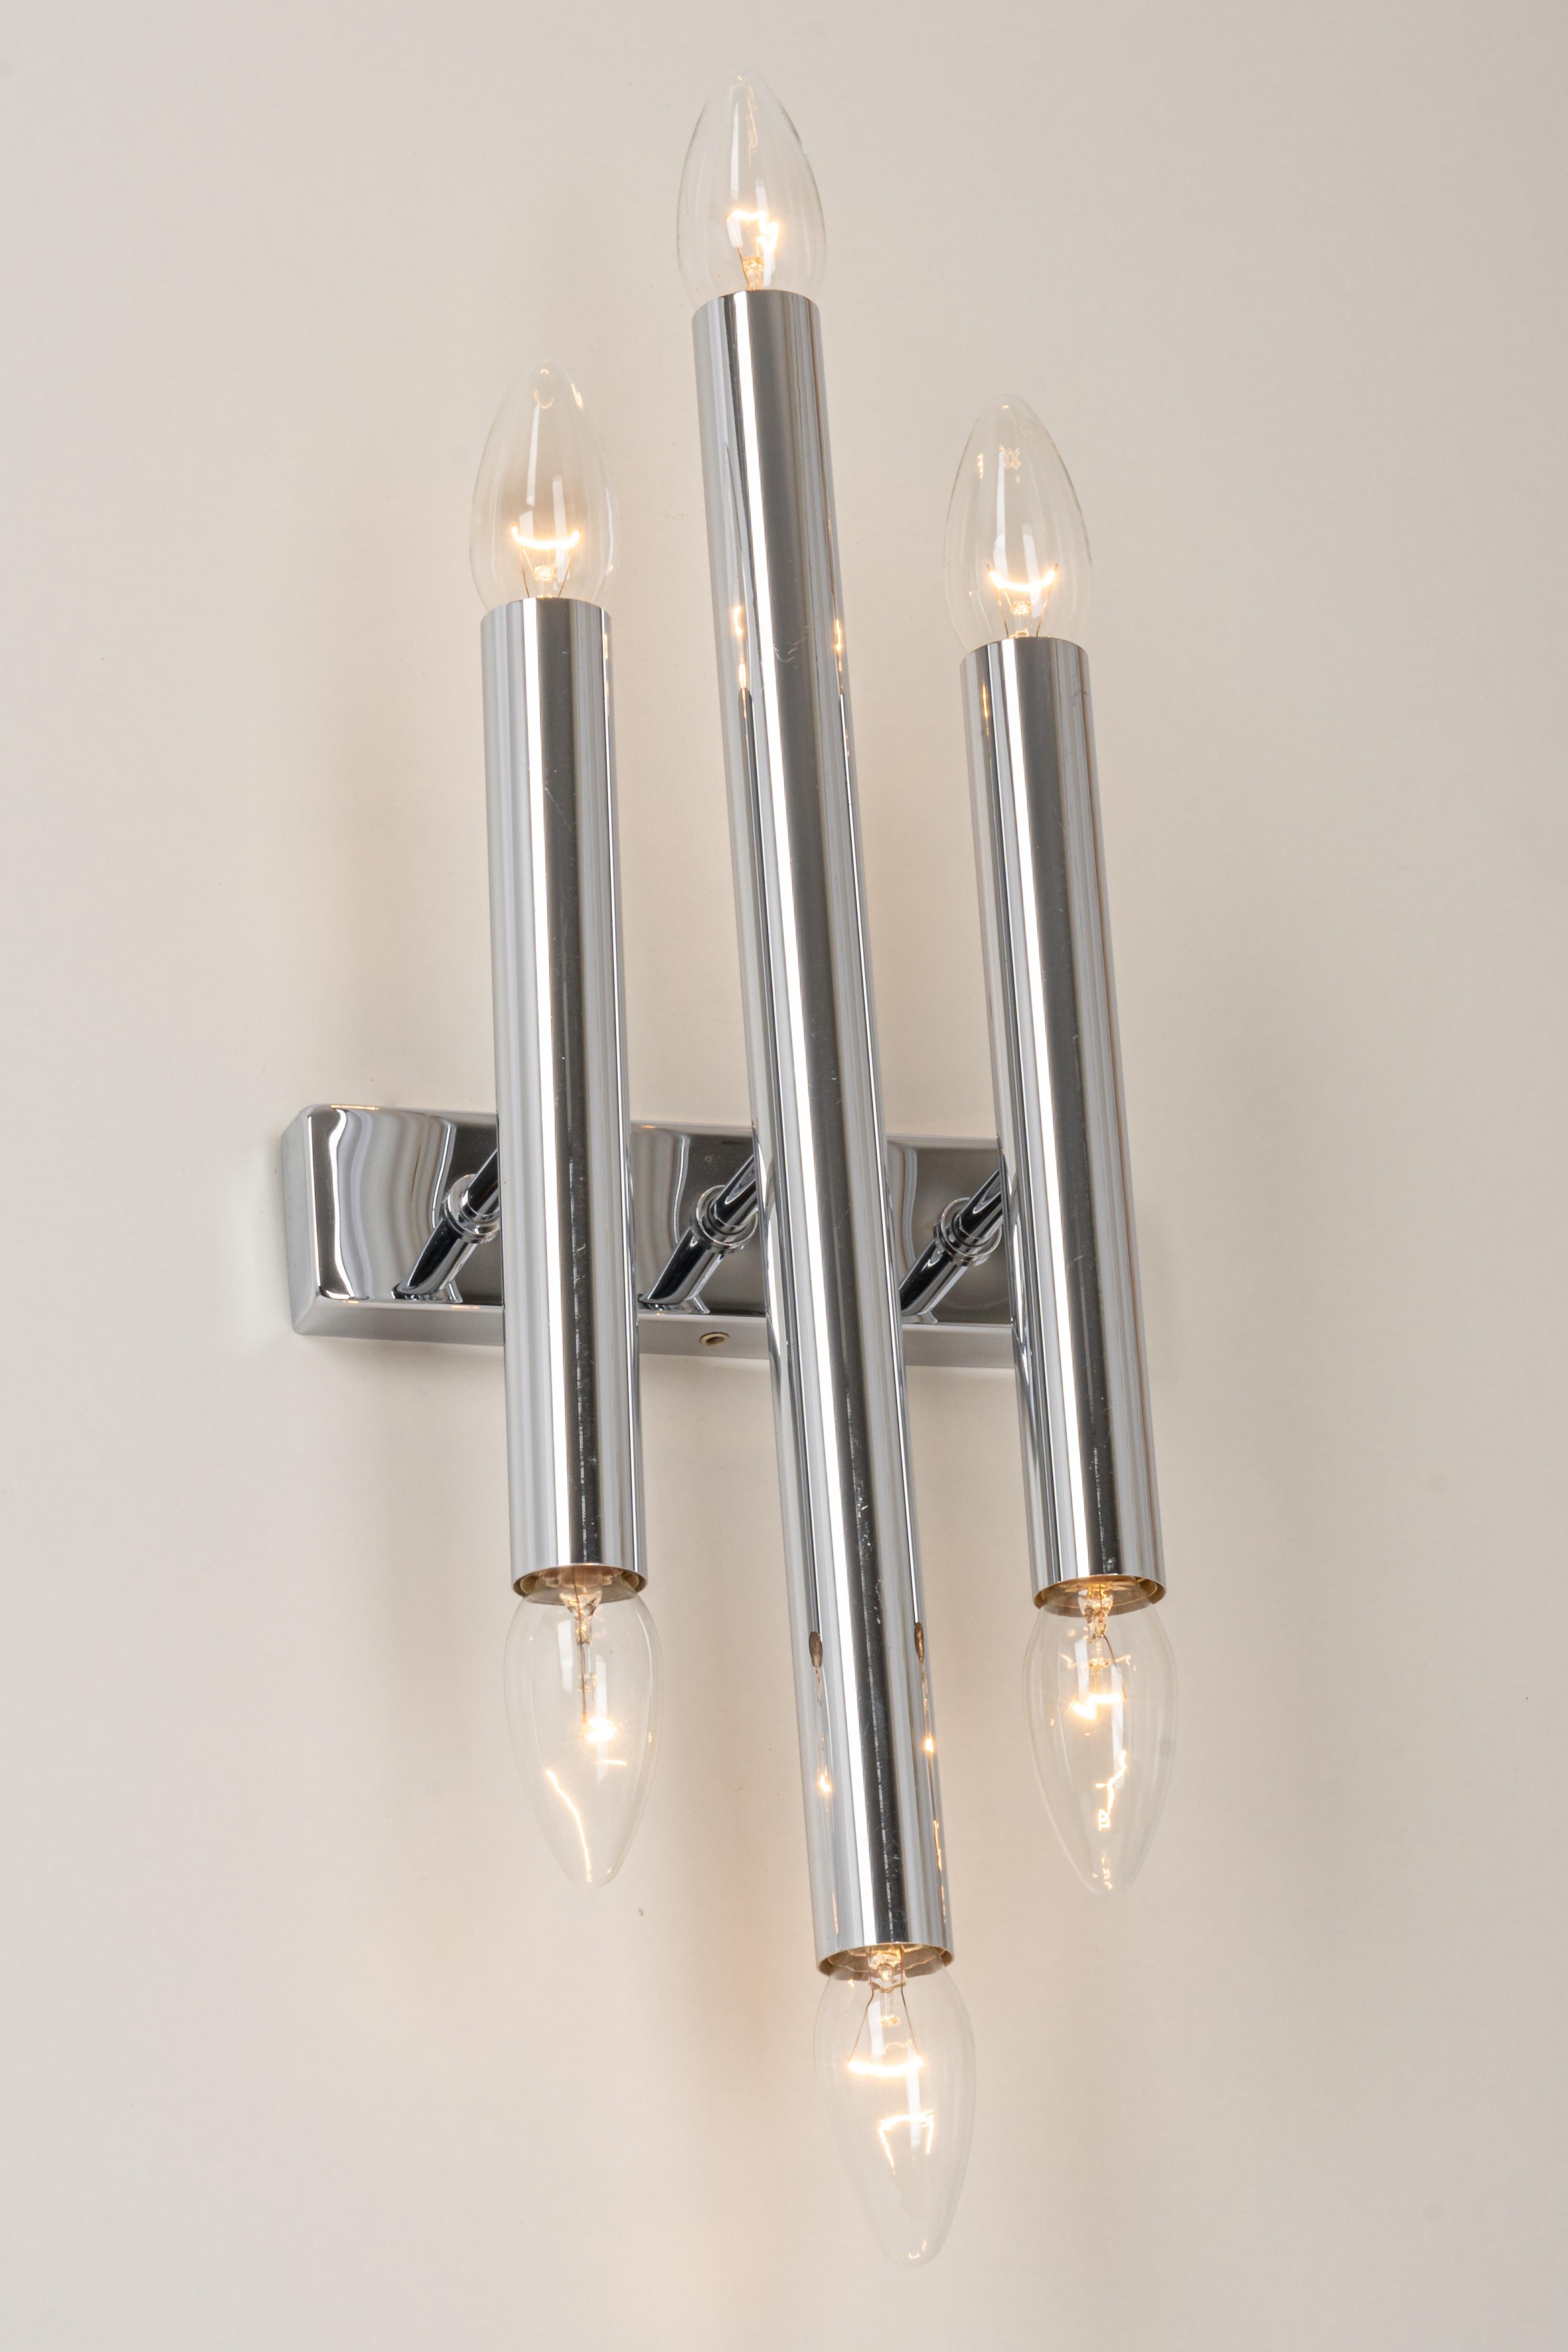 Pair of Large Italian Chrome Wall Sconces Sciolari Style, 1970s For Sale 1